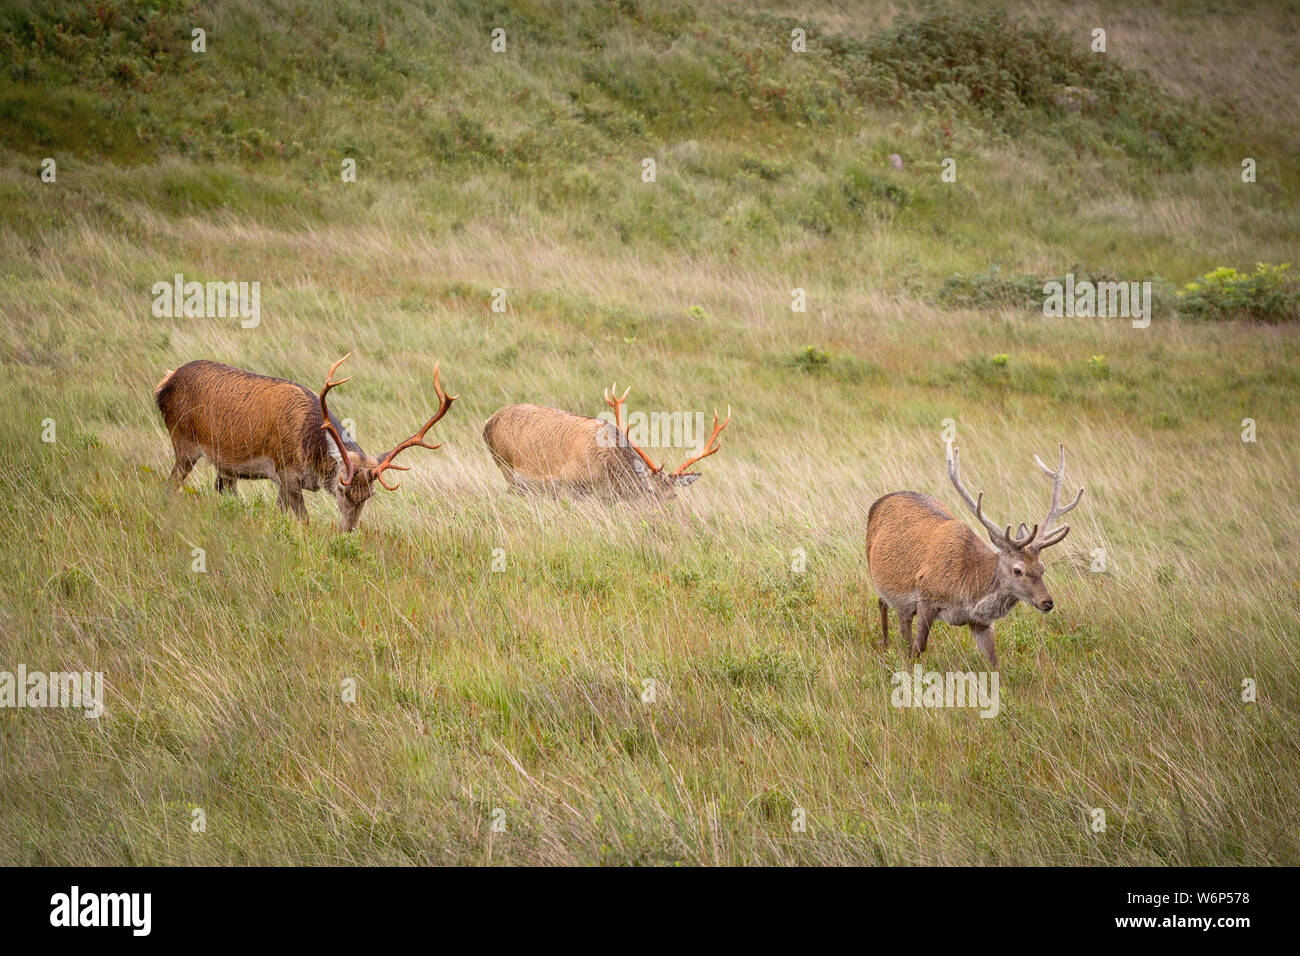 Stags graze and roam wild in glen etive, Scottish highlands among long grass and heathland Stock Photo